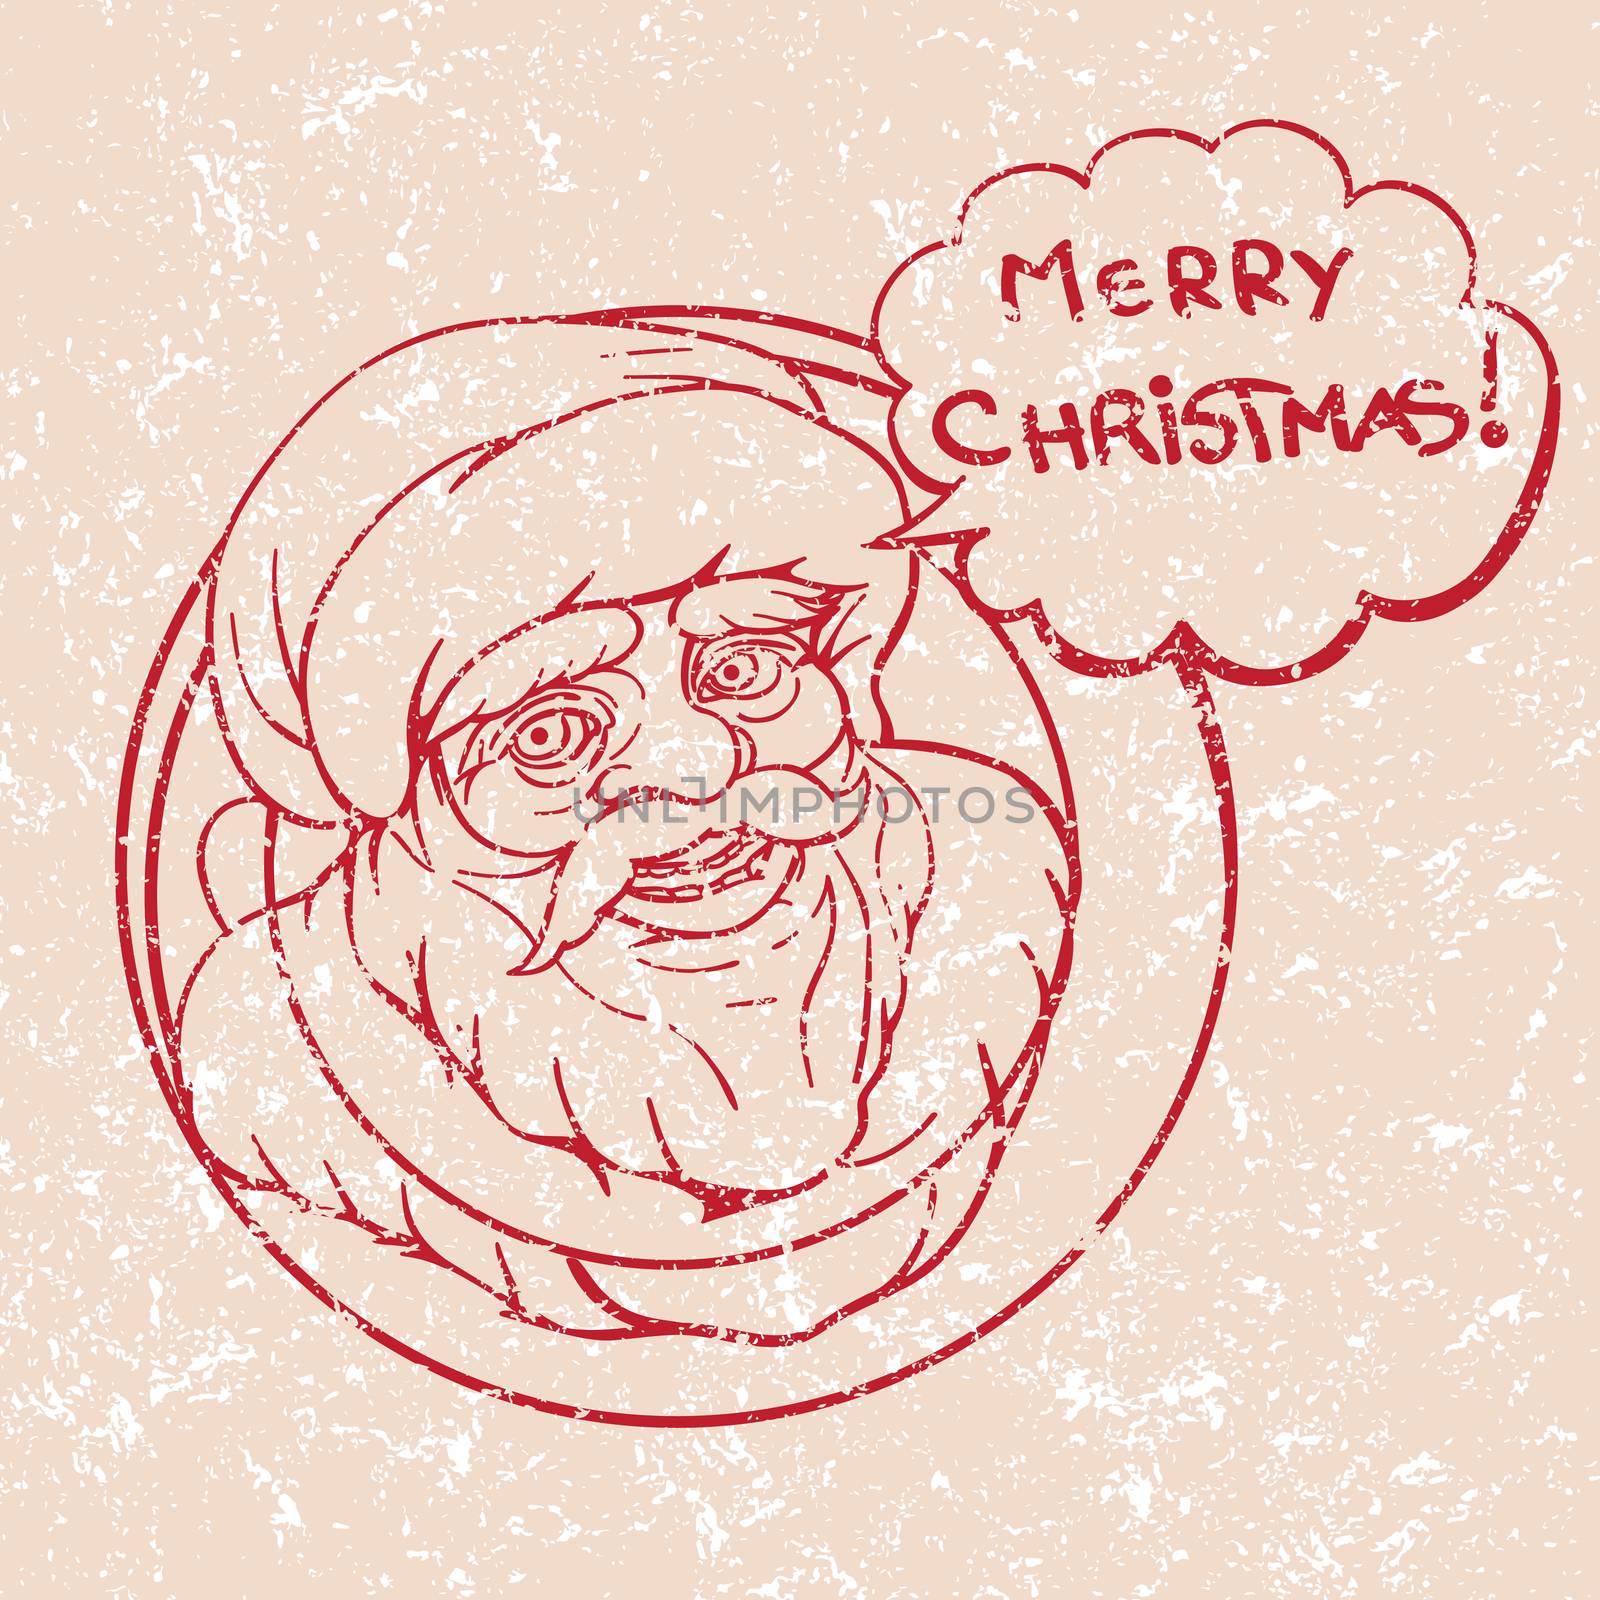 Santa Claus hand drawn illustration, retro grungy stamp greetings card with message in speech bubble for Christmas